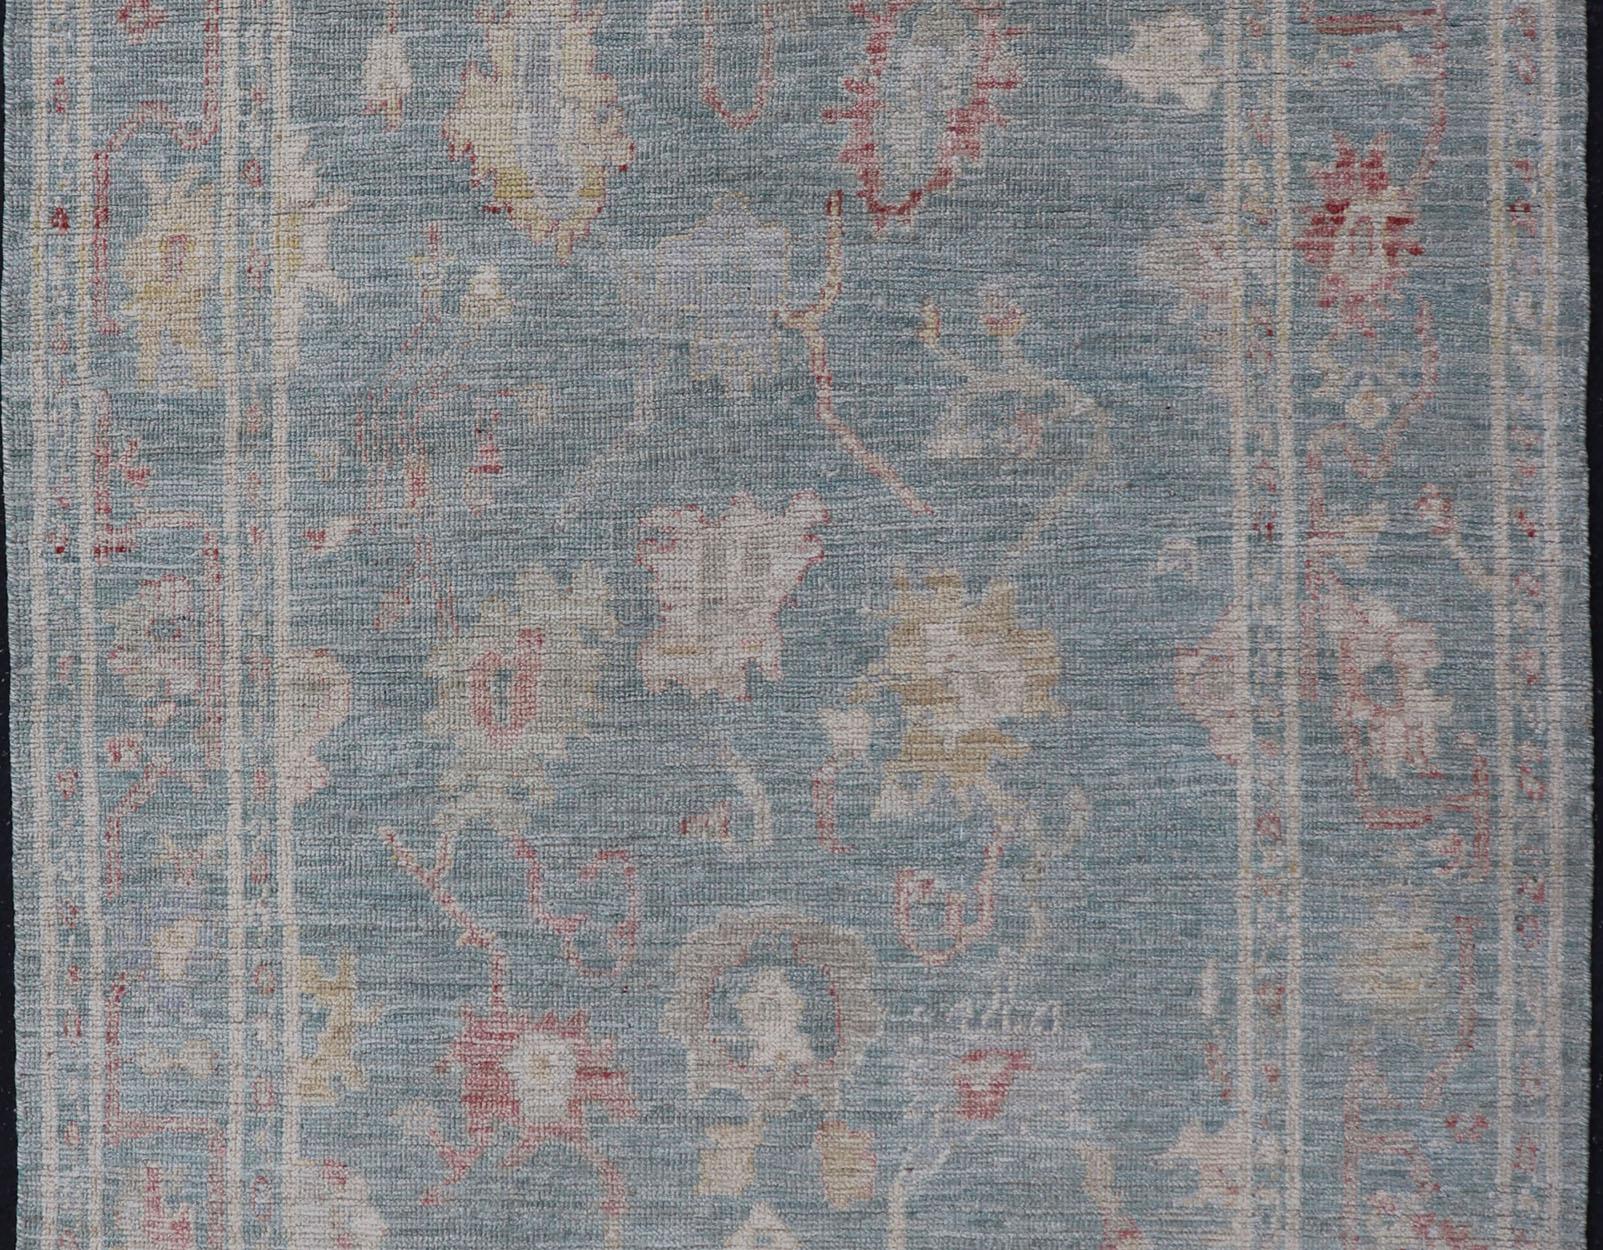 Measures: 3'11 x 5'11
Modern Oushak Rug with a Light Blue-Gray Field With All-Over Floral Motifs. Keivan Woven Arts; rug AWR-12302 Country of Origin: Afghanistan Type: Oushak Design: All-Over, Floral. 
Hand-Knotted in wool, this rustic piece holds